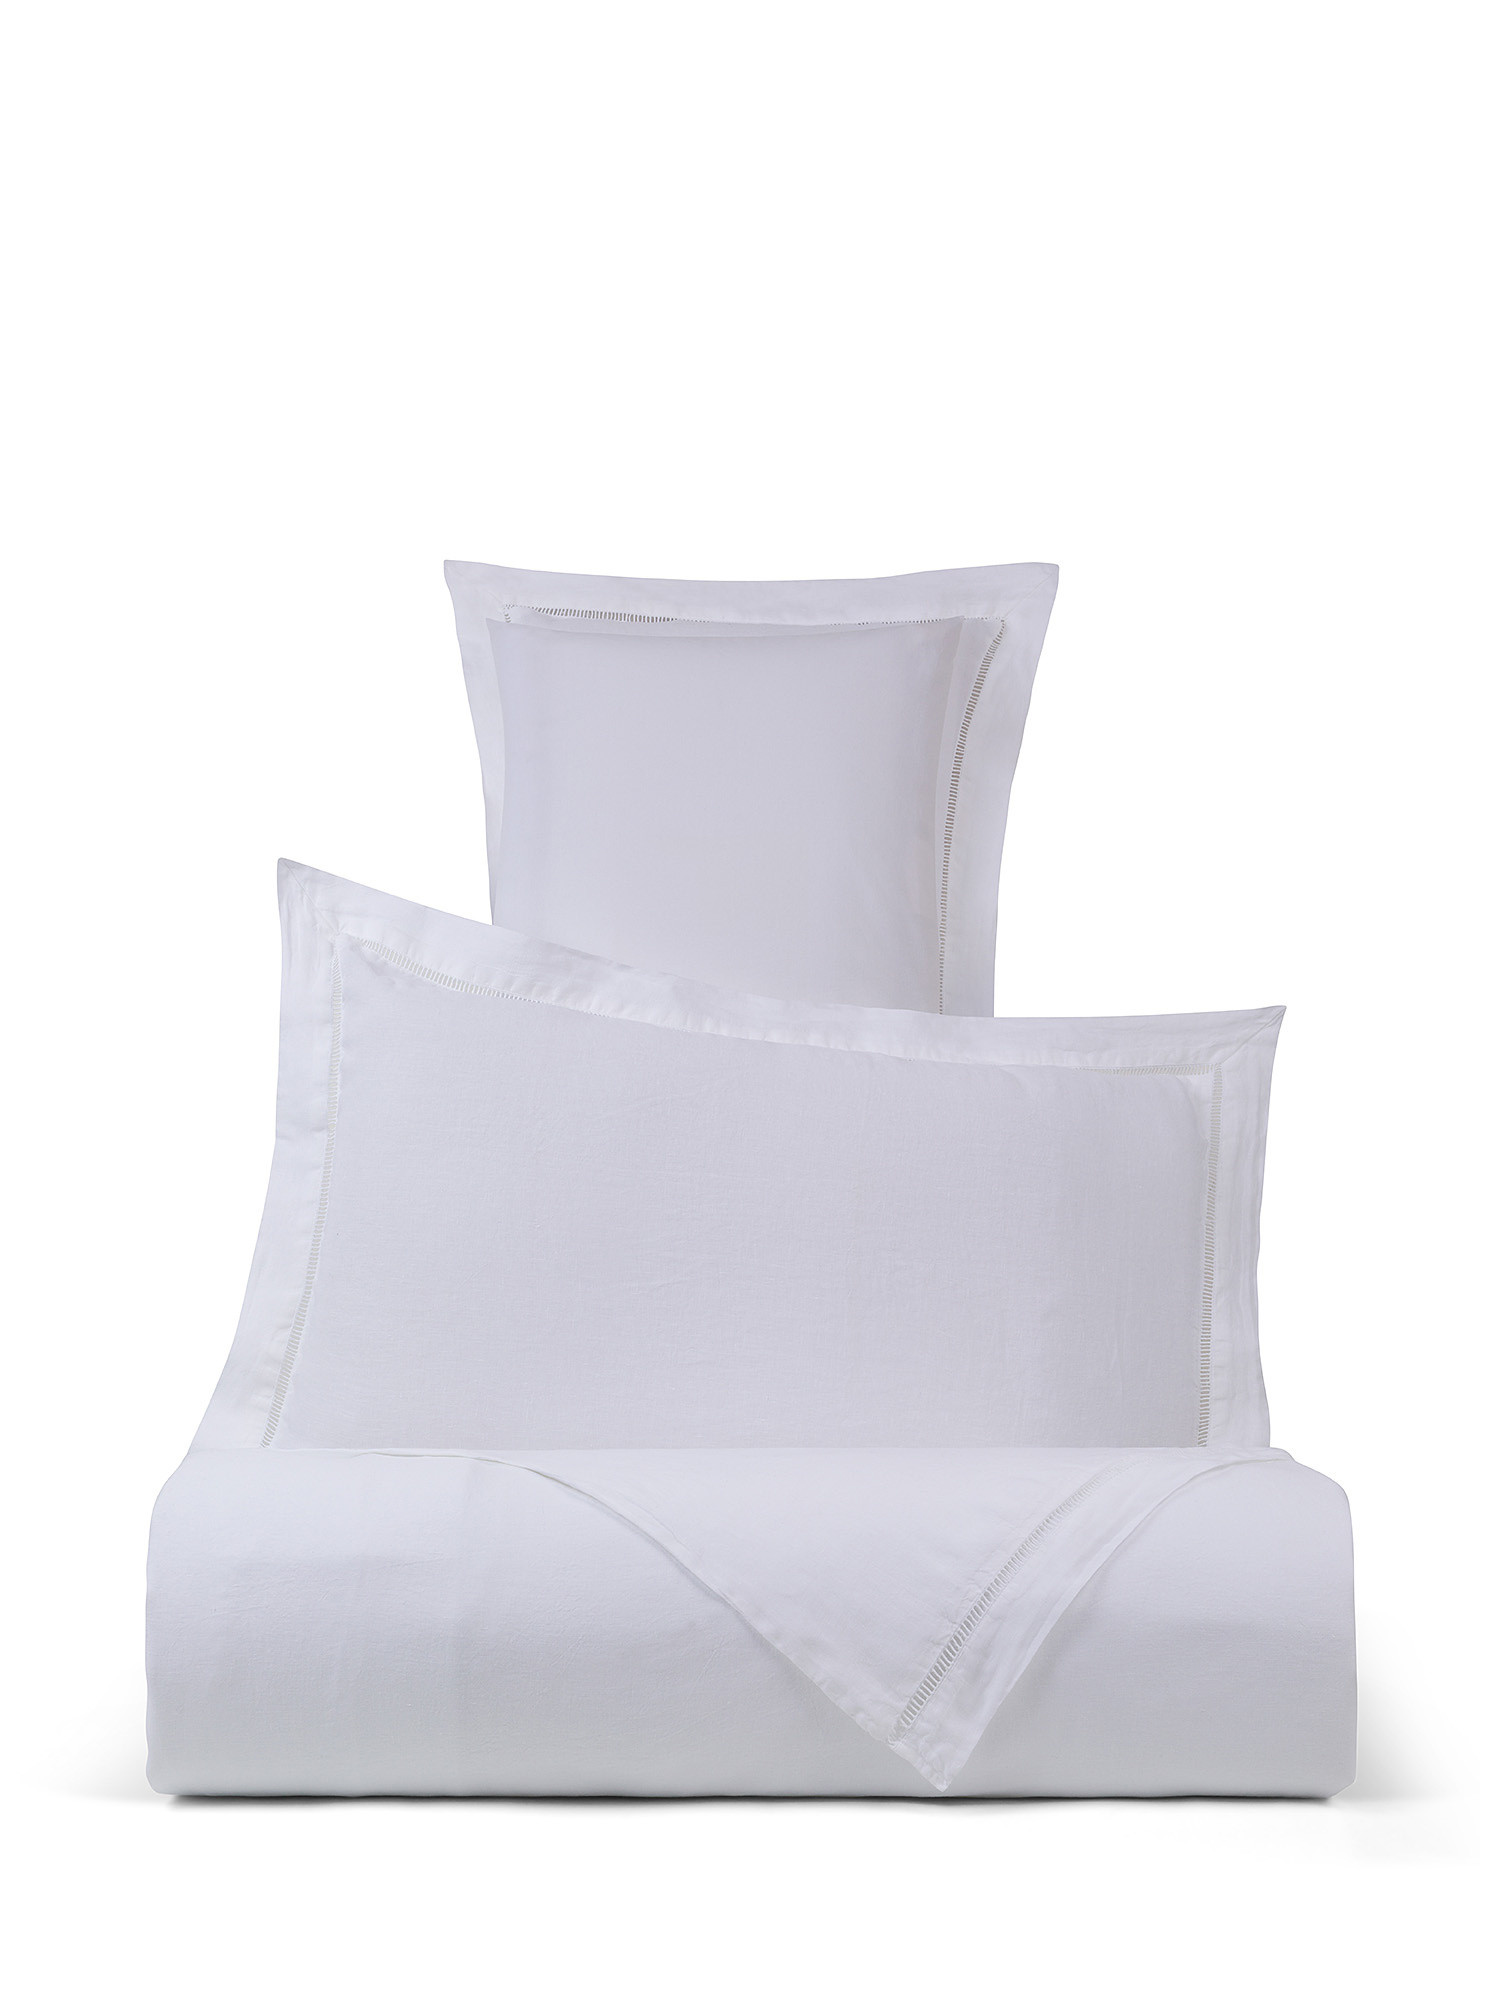 Portofino duvet cover in pure linen with a-jour hem, White, large image number 0